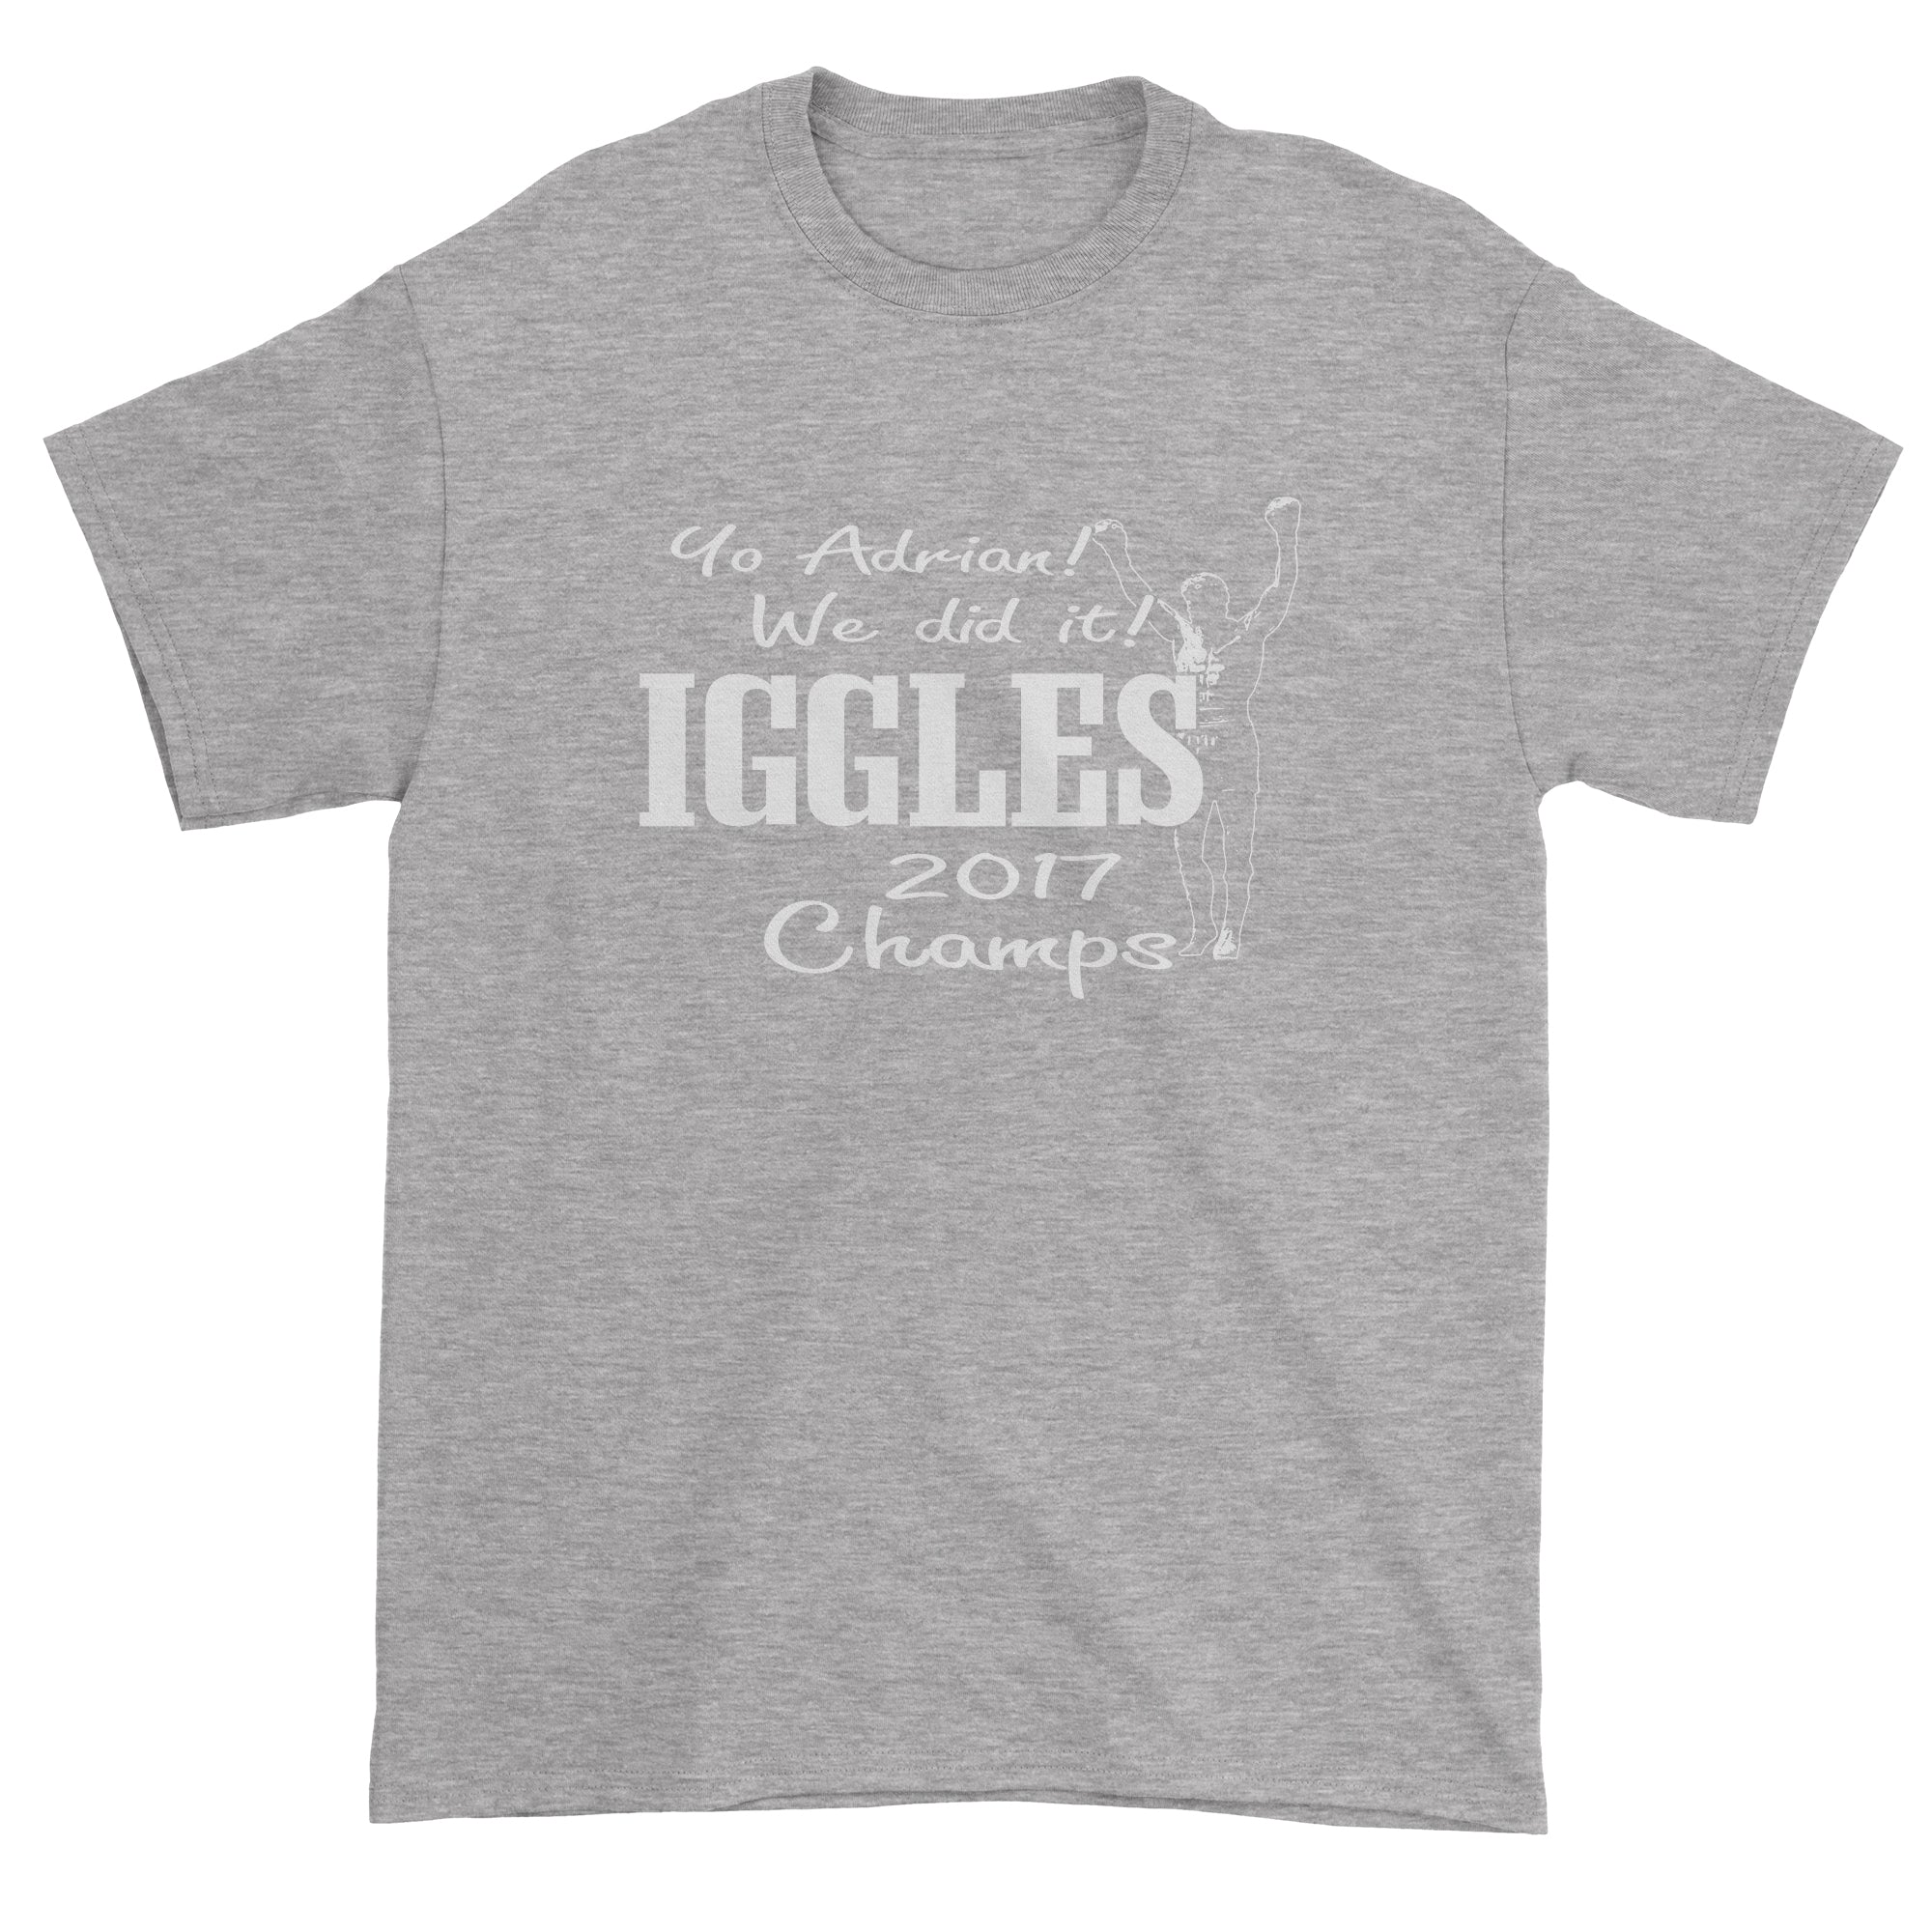 Philly Iggles Football Champs 2017 Men's T-Shirt